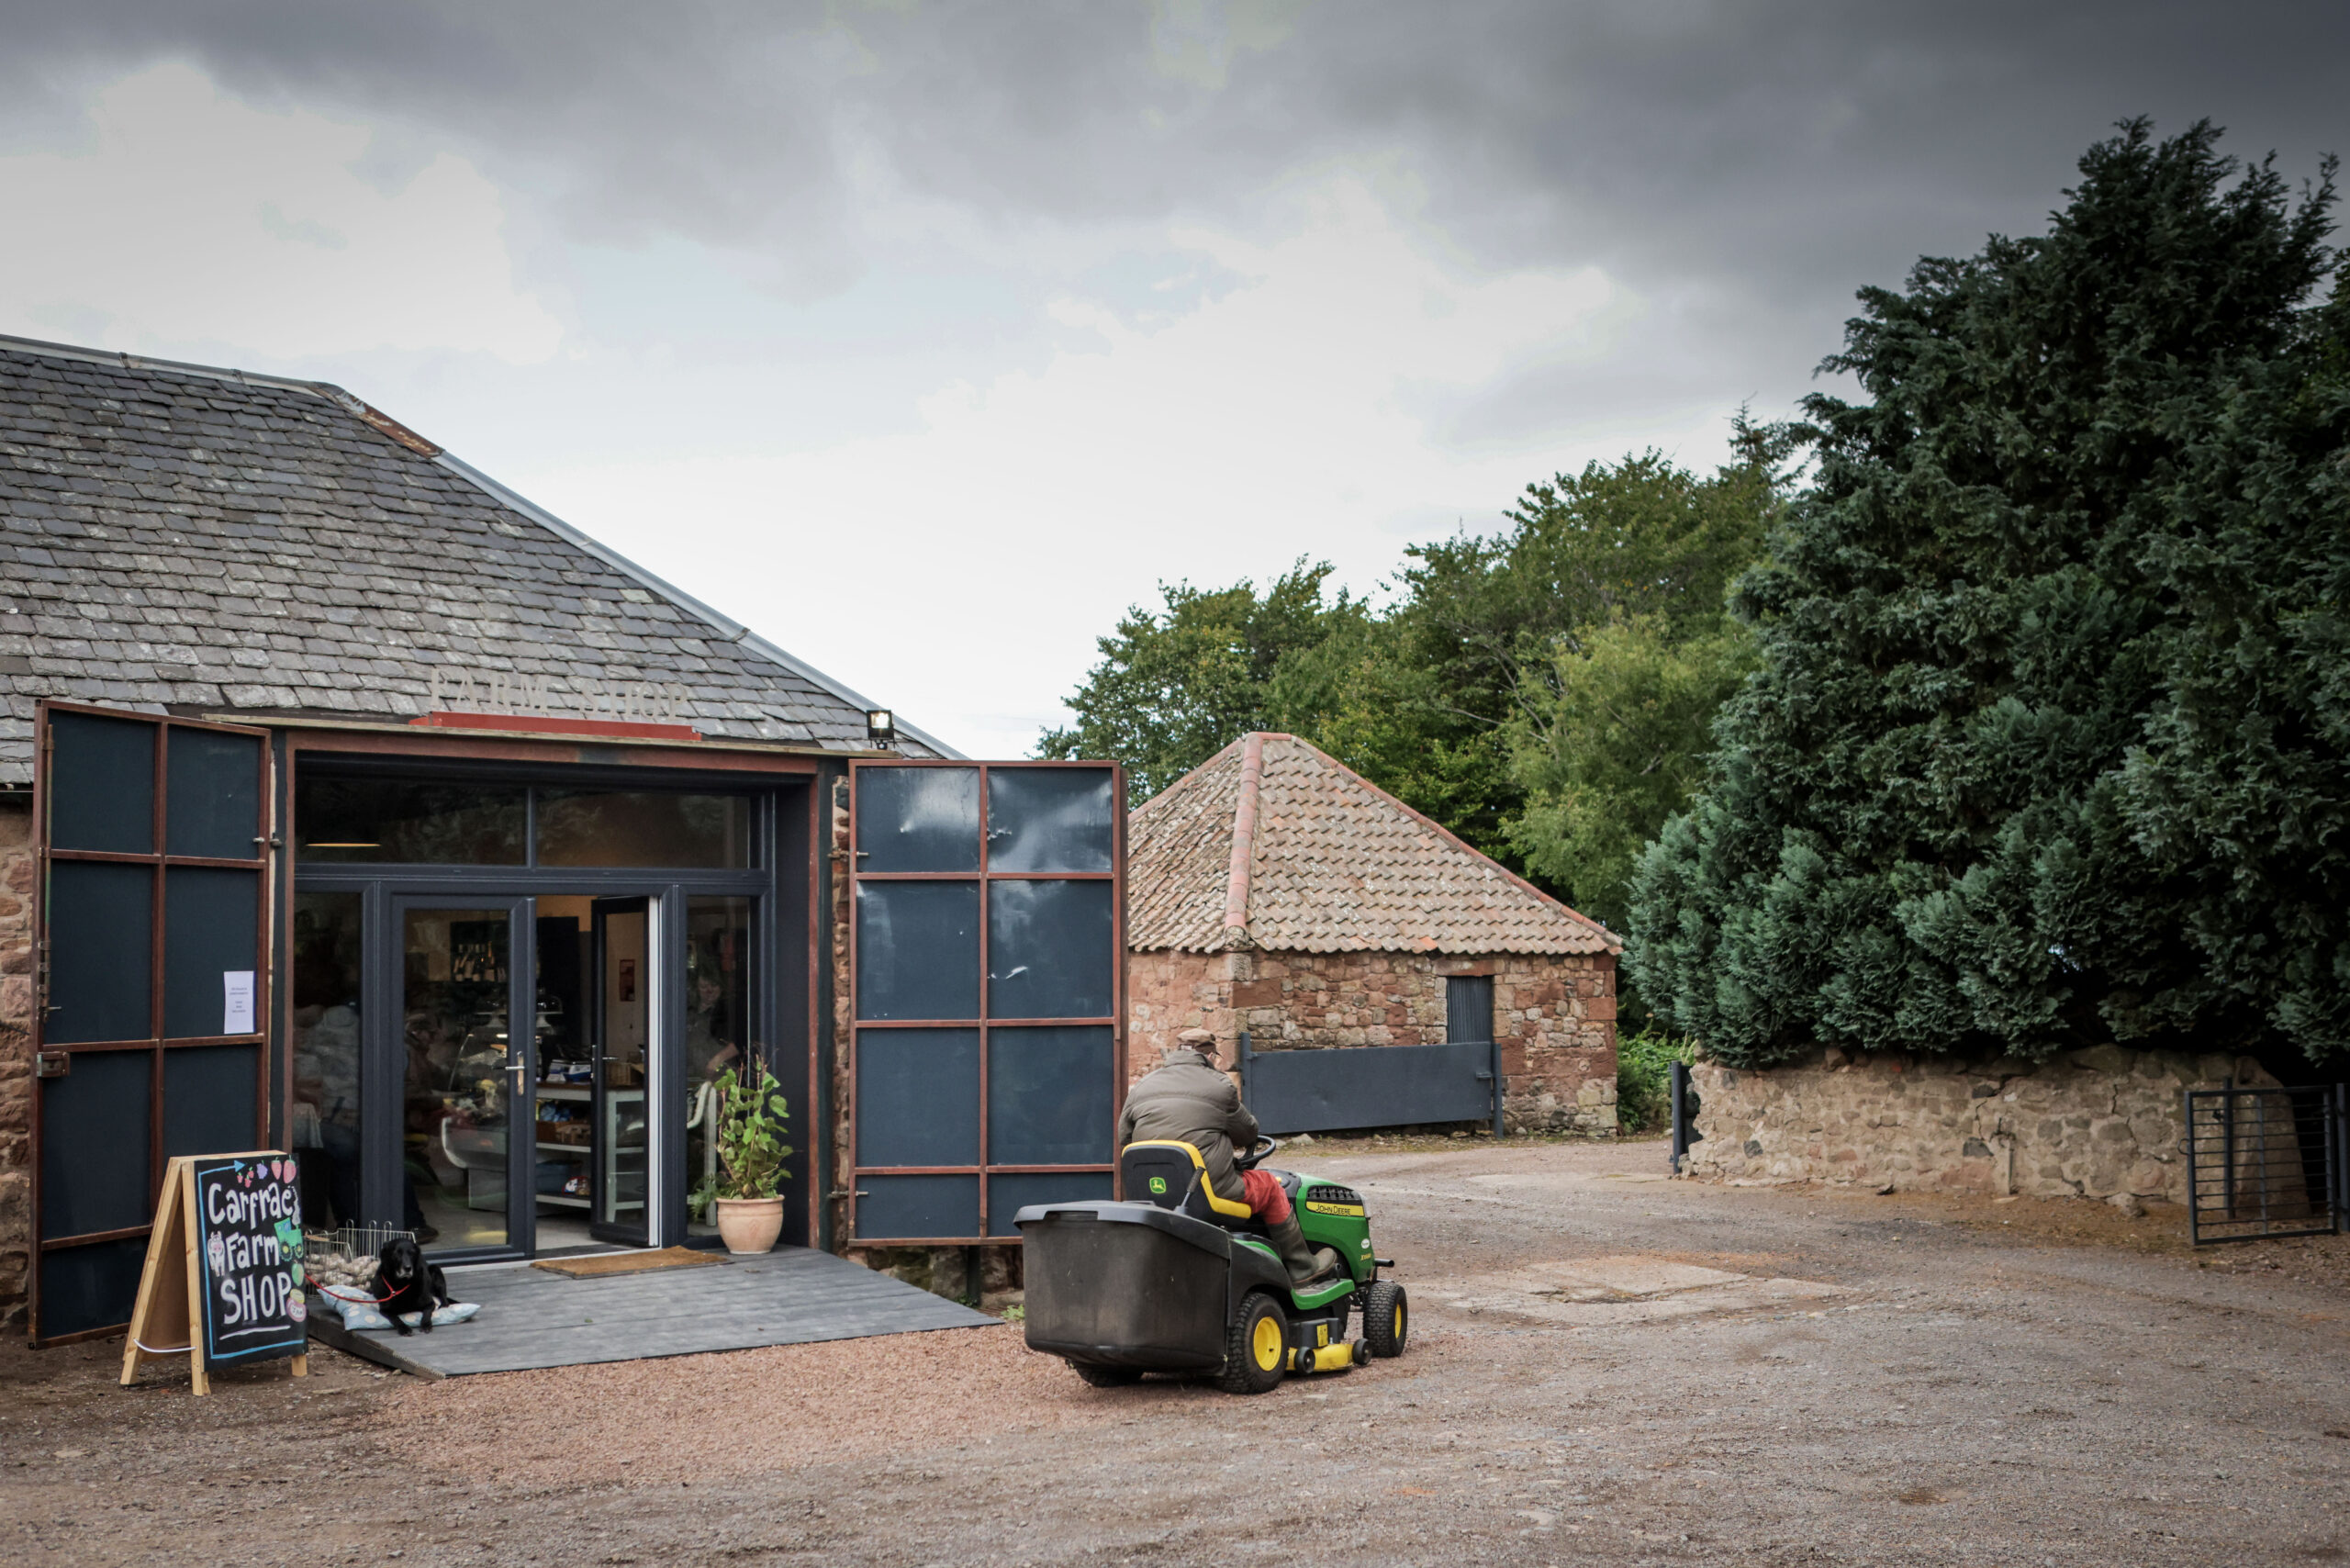 Carfrae Farm Shop exterior doors with Pip the black labrador and Hamish on a lawn mower